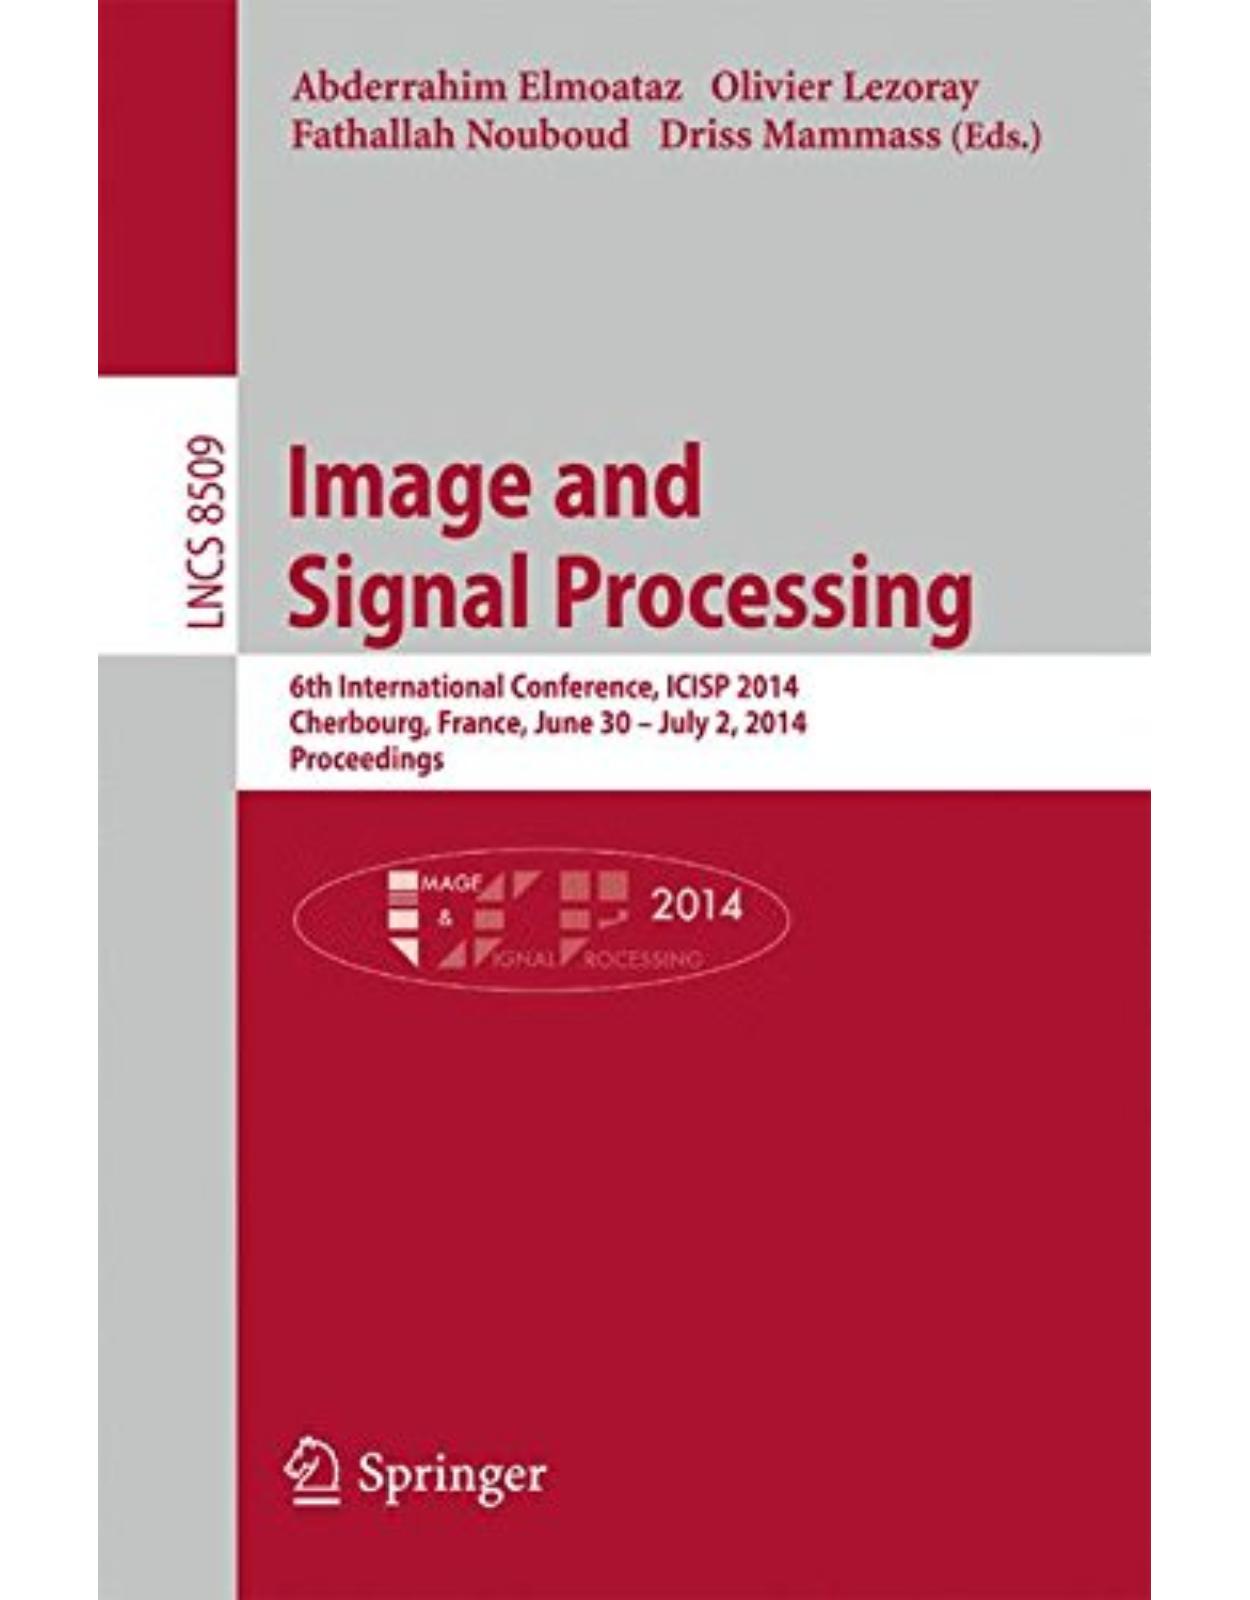 Image and Signal Processing